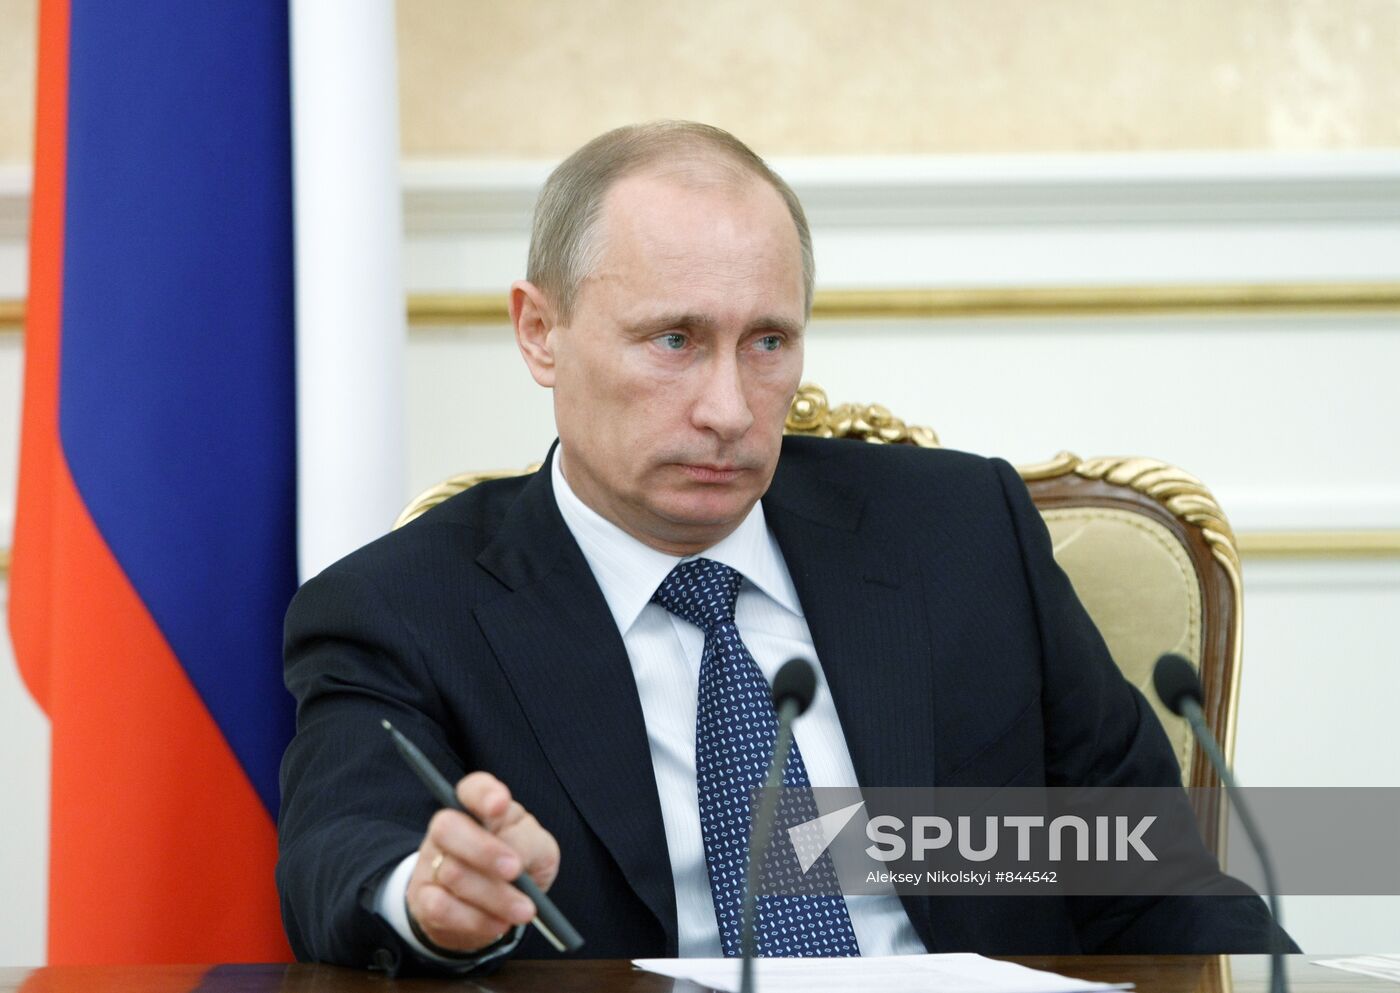 Vladimir Putin chairs meeting of government commission